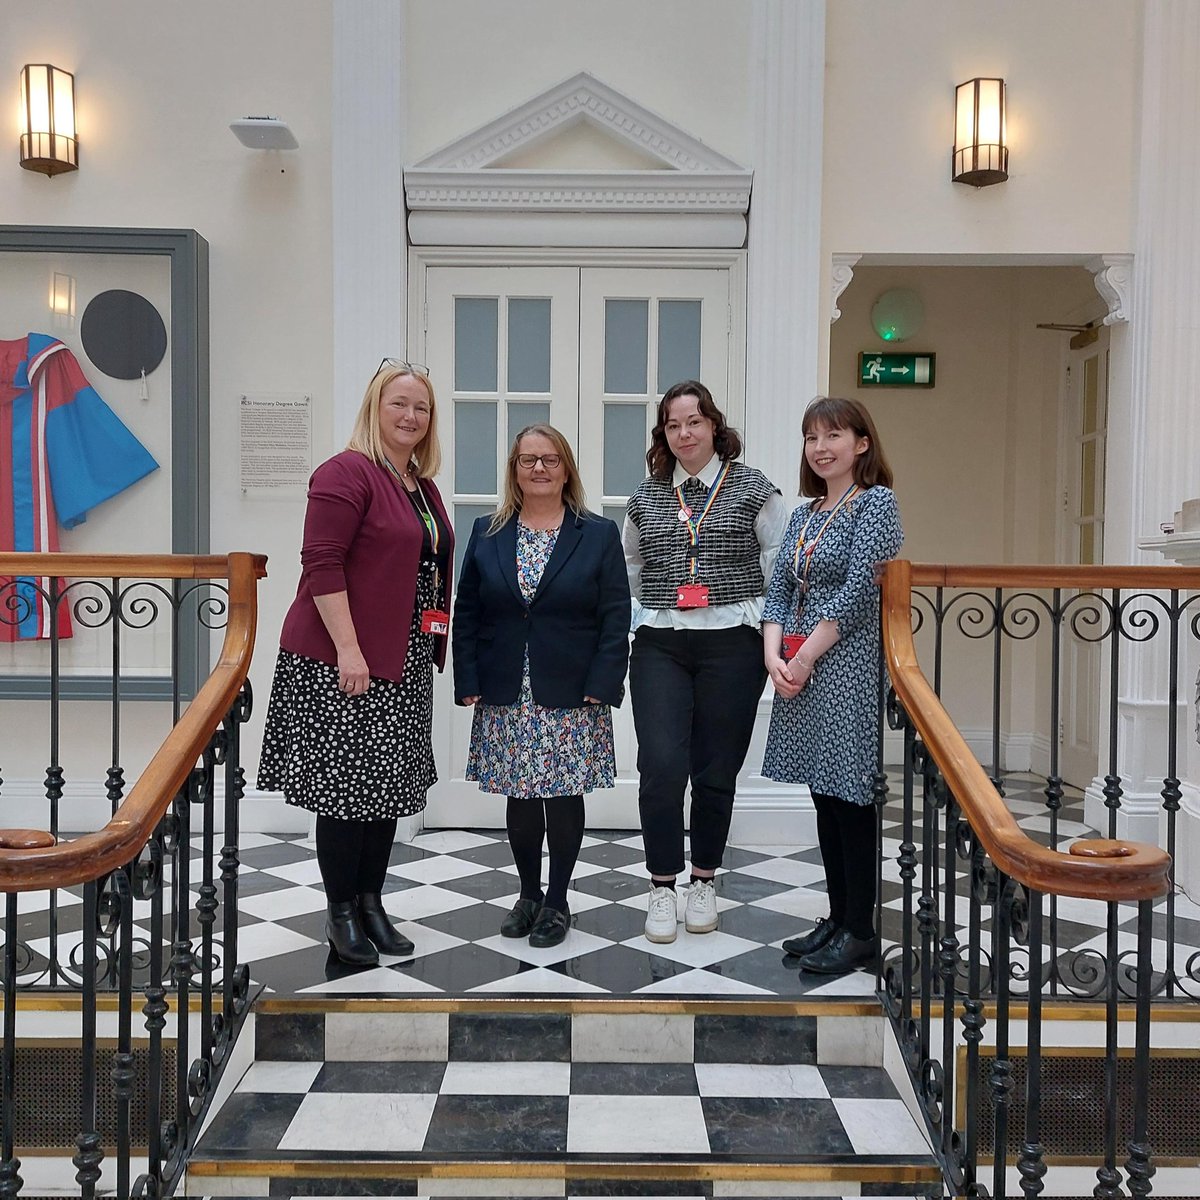 We were delighted to welcome @AutisticDoctor to @RCSI_Irl today to begin a very important discussion on autistic healthcare, autistic HCP, and how we could incorporate the SPACE framework into practice and education in ireland. Thank you to @RCSI_Equality for organising!